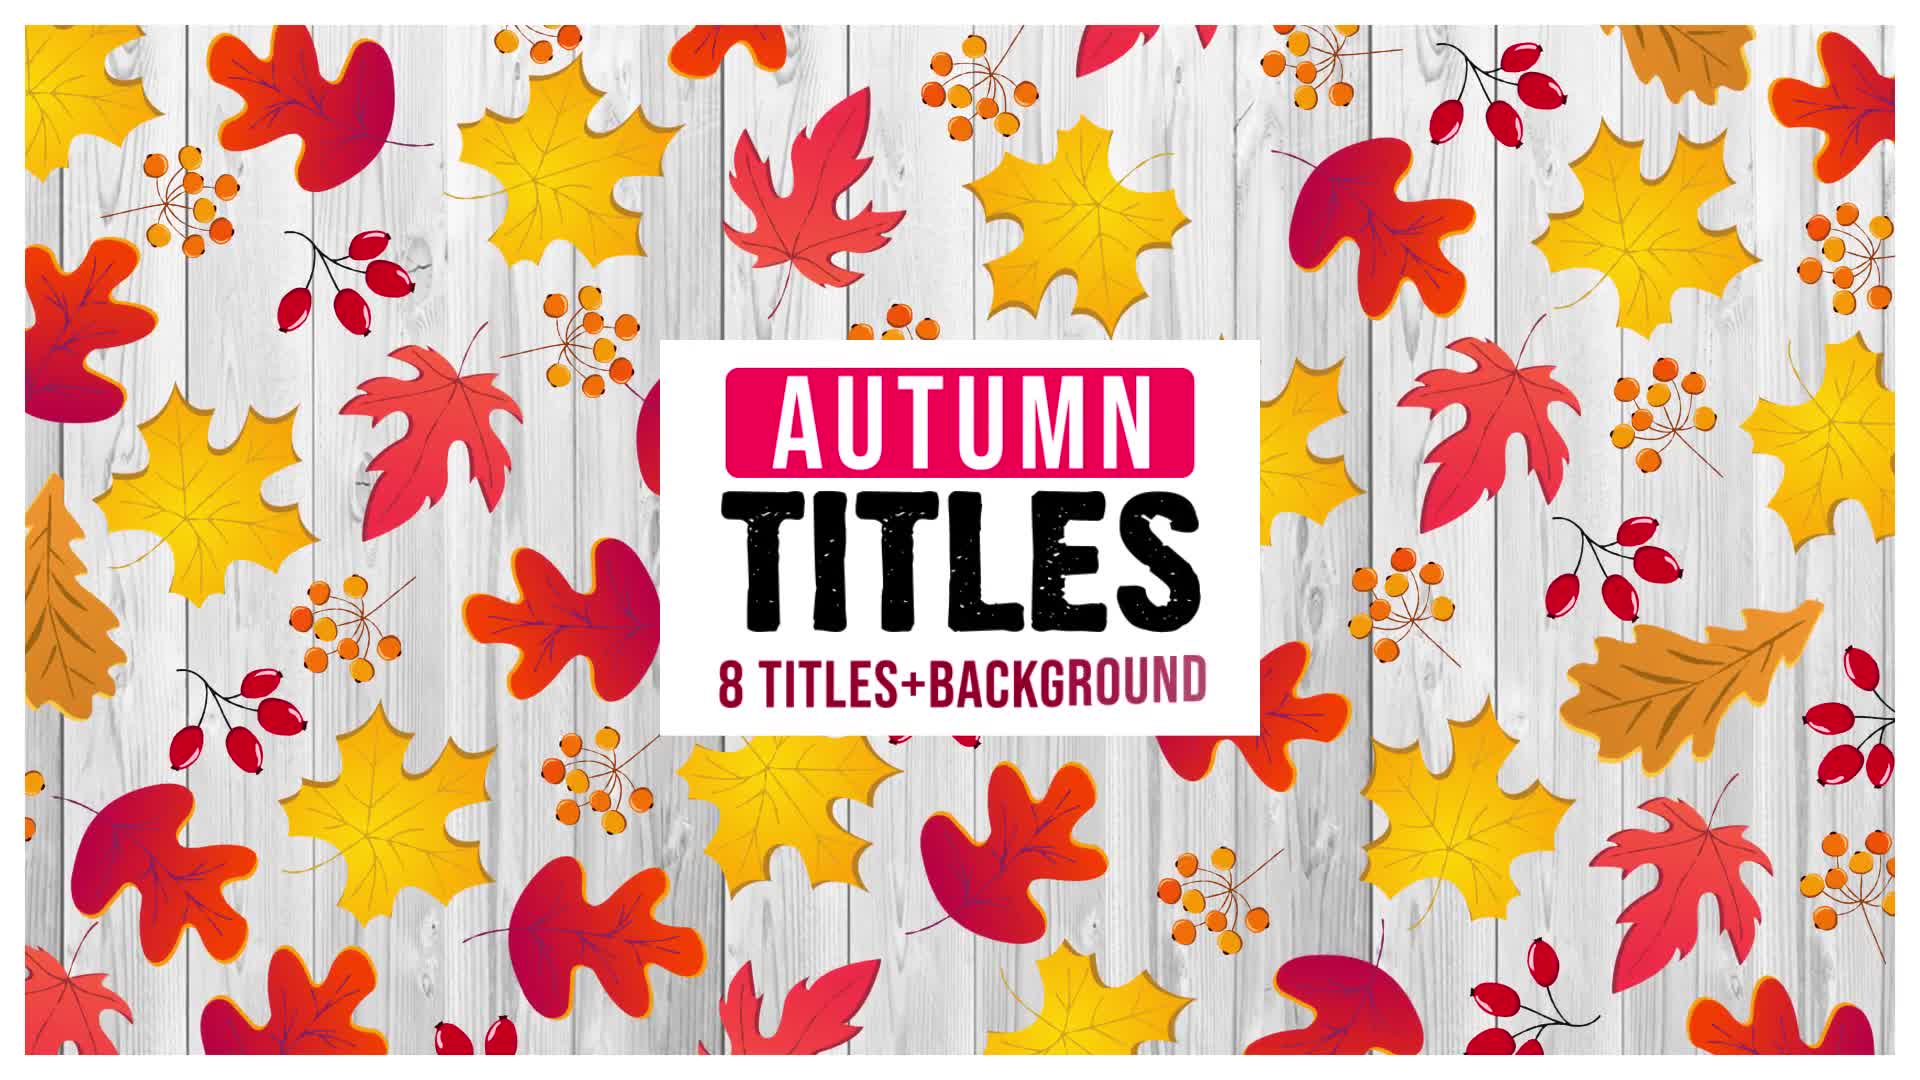 of the true autumn title